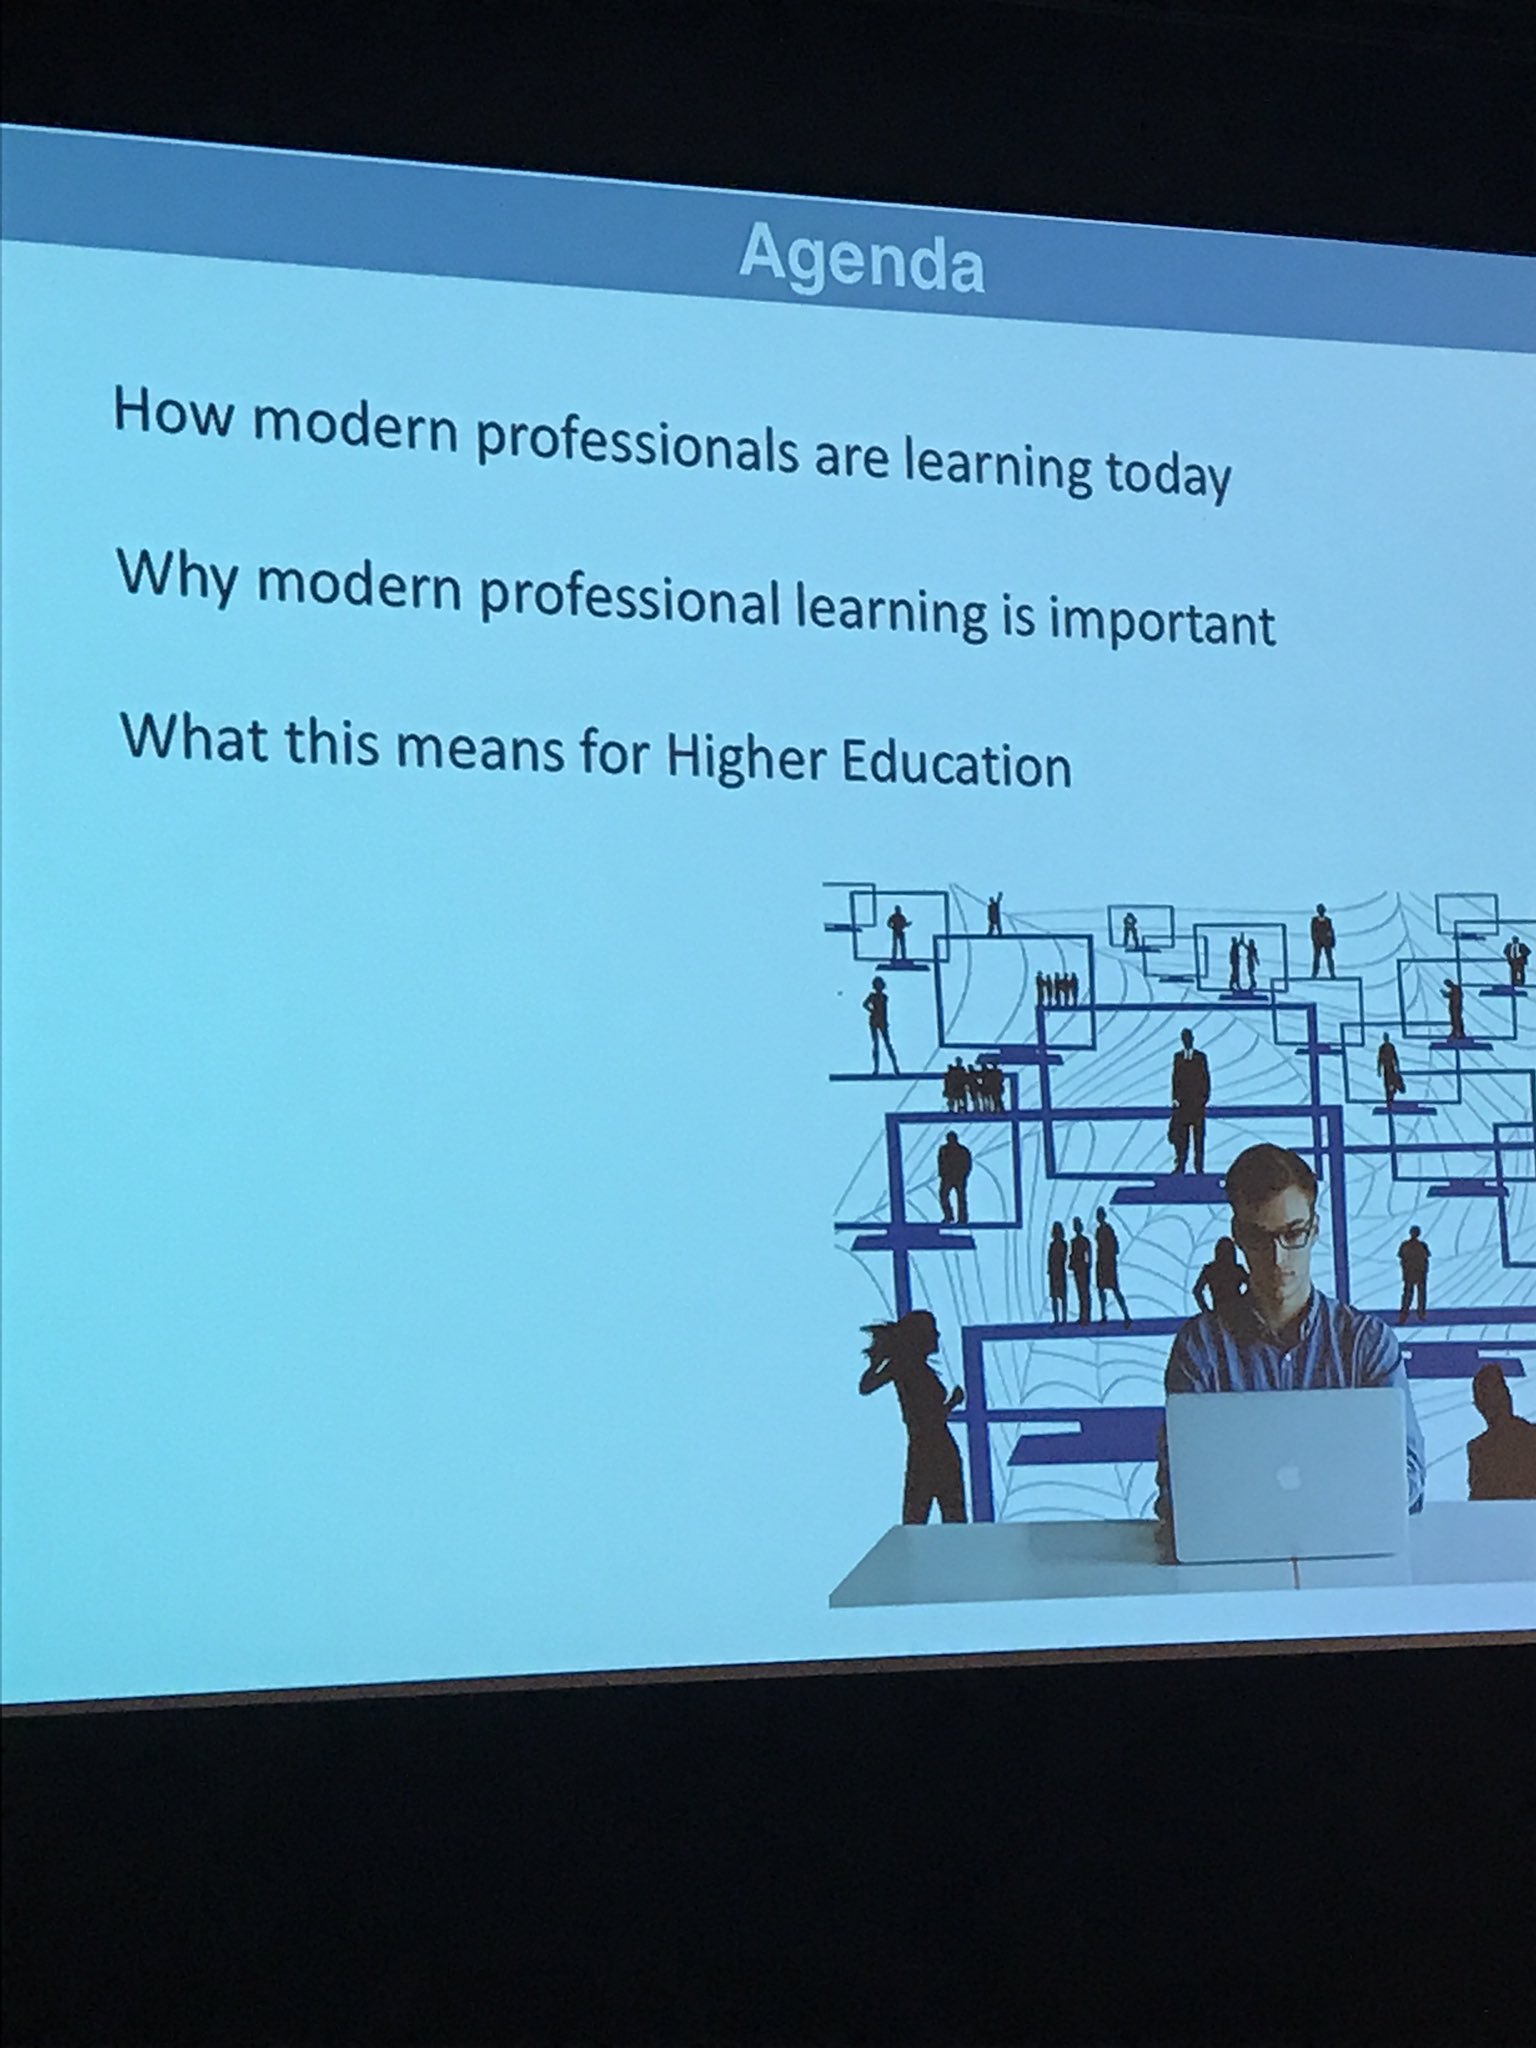 Jane Hart @C4LPT talks about how modern professionals are learning today @susaltteam #SUSALT17 @SwanseaUni https://t.co/qfyMmyVyxO